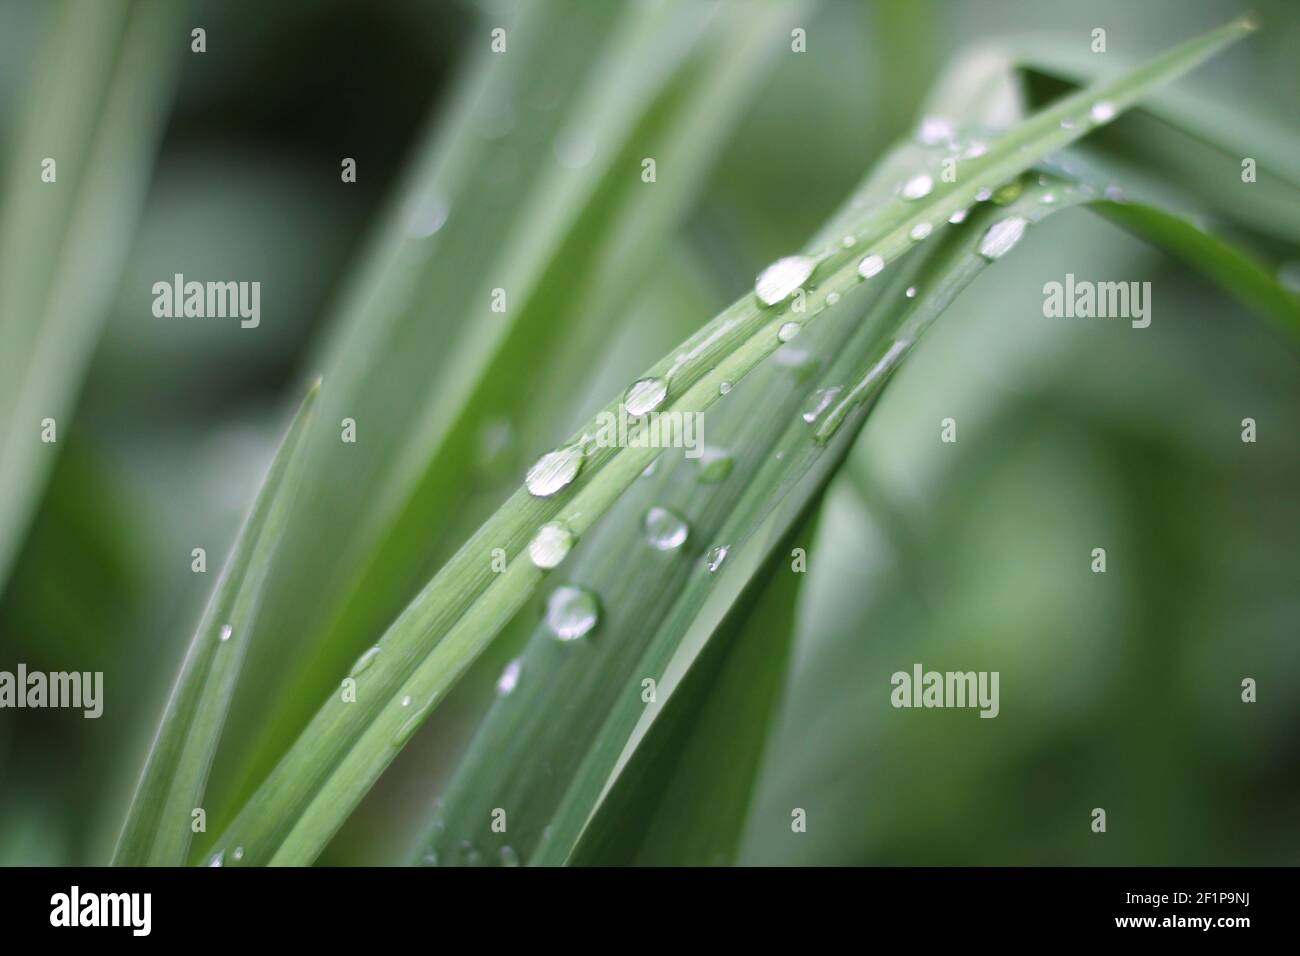 Water drops or morning dew on fresh green grass. Nature background Stock Photo